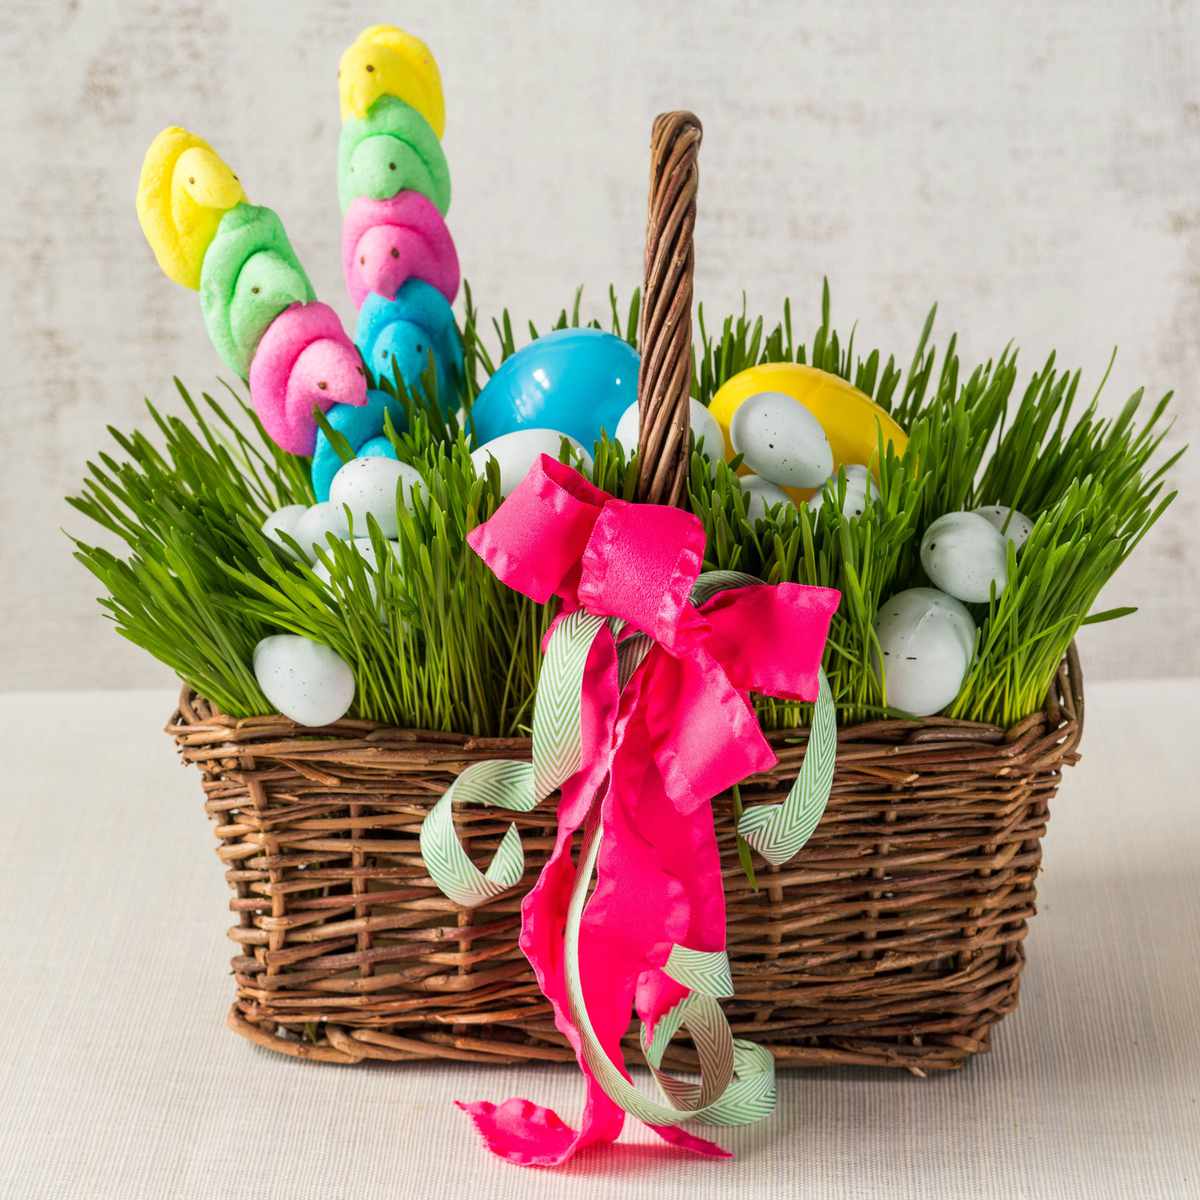 The Rye Grass Easter Basket